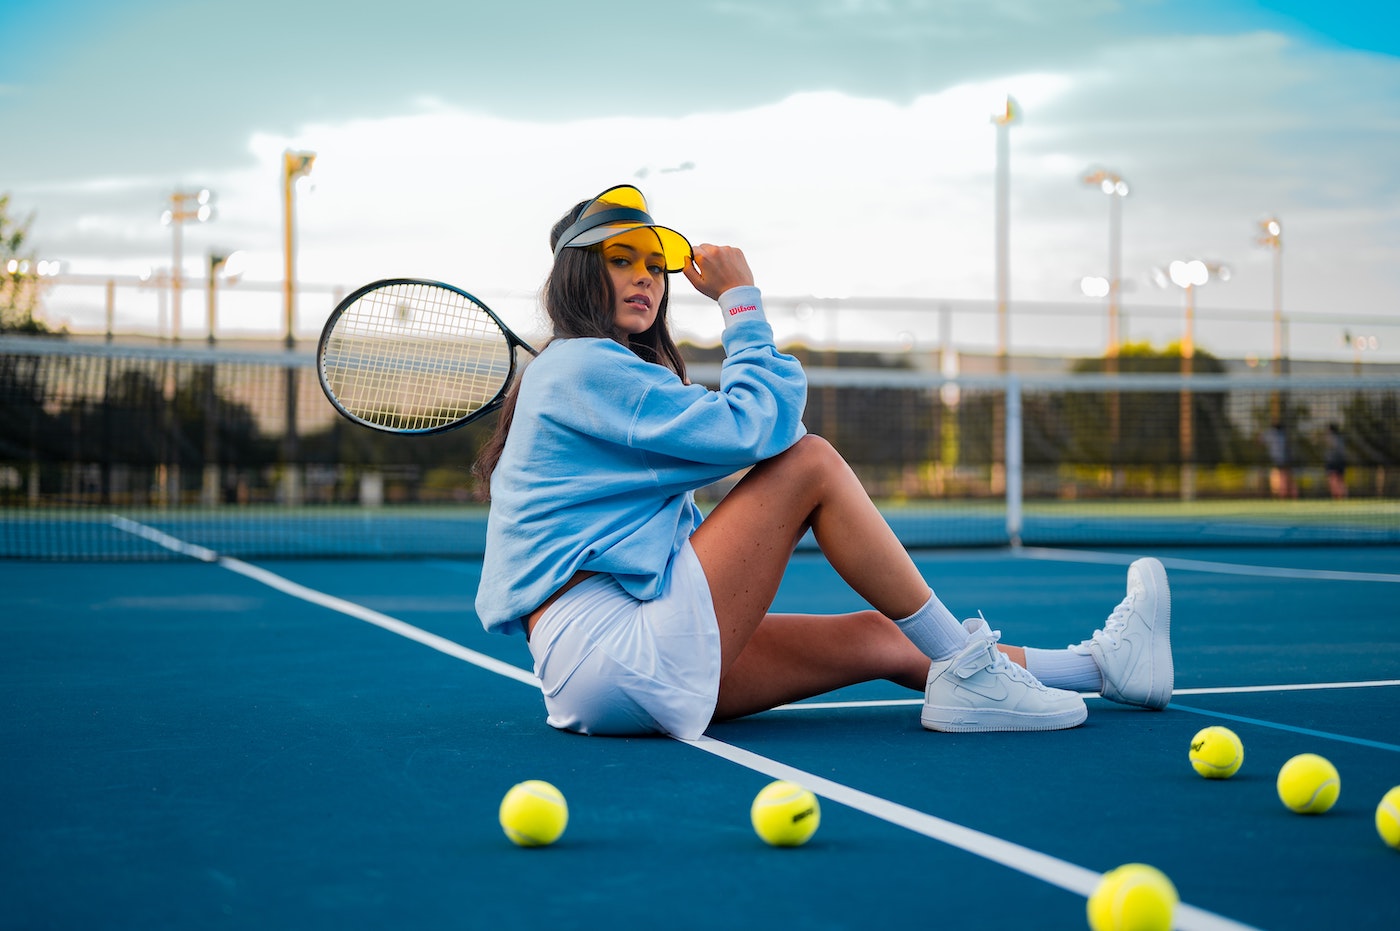 What to Wear to Play Tennis